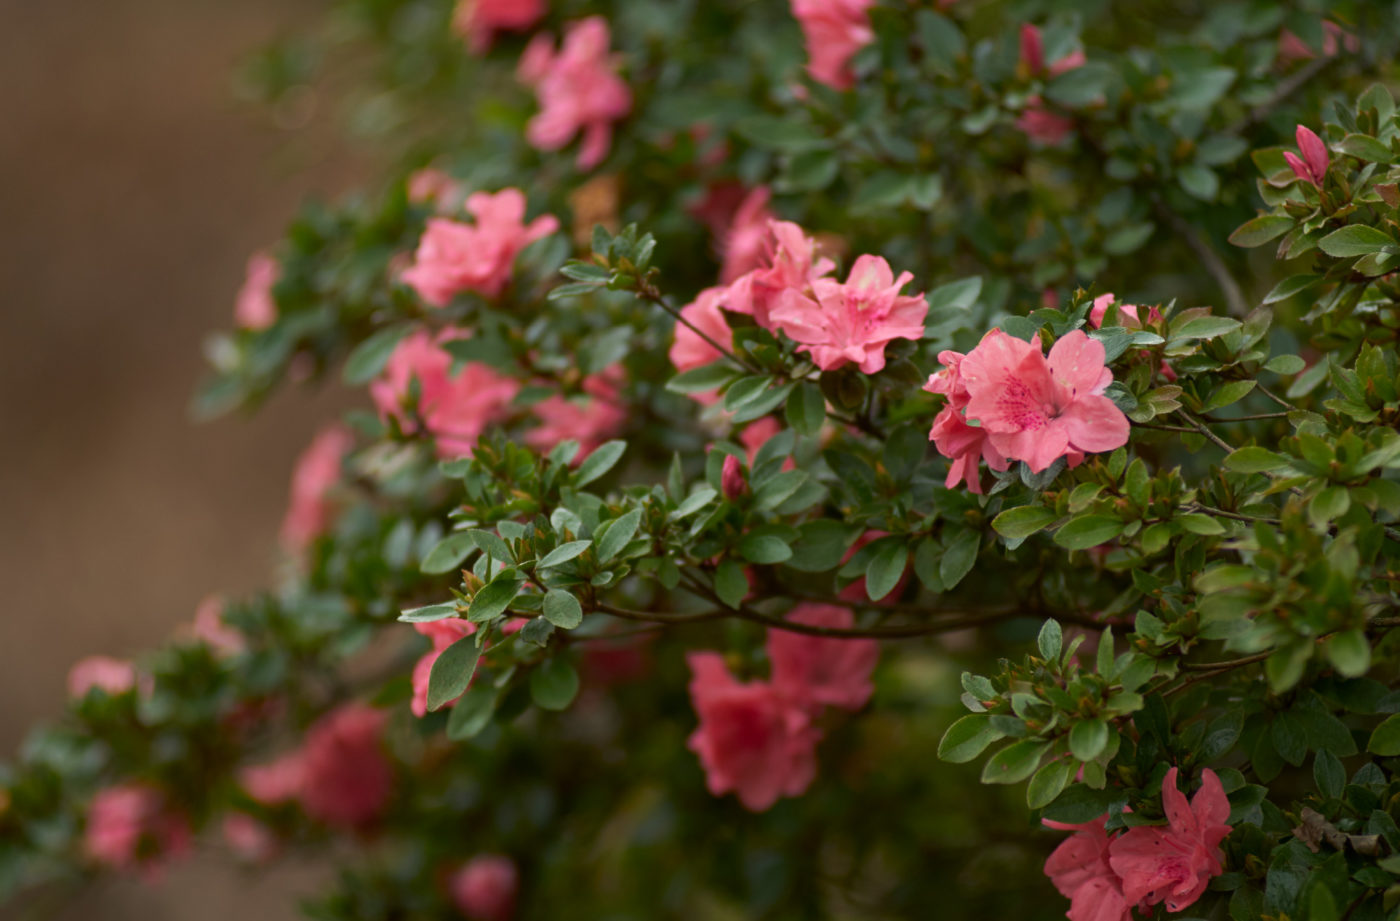 A detail photo of pink azaleas blooming.